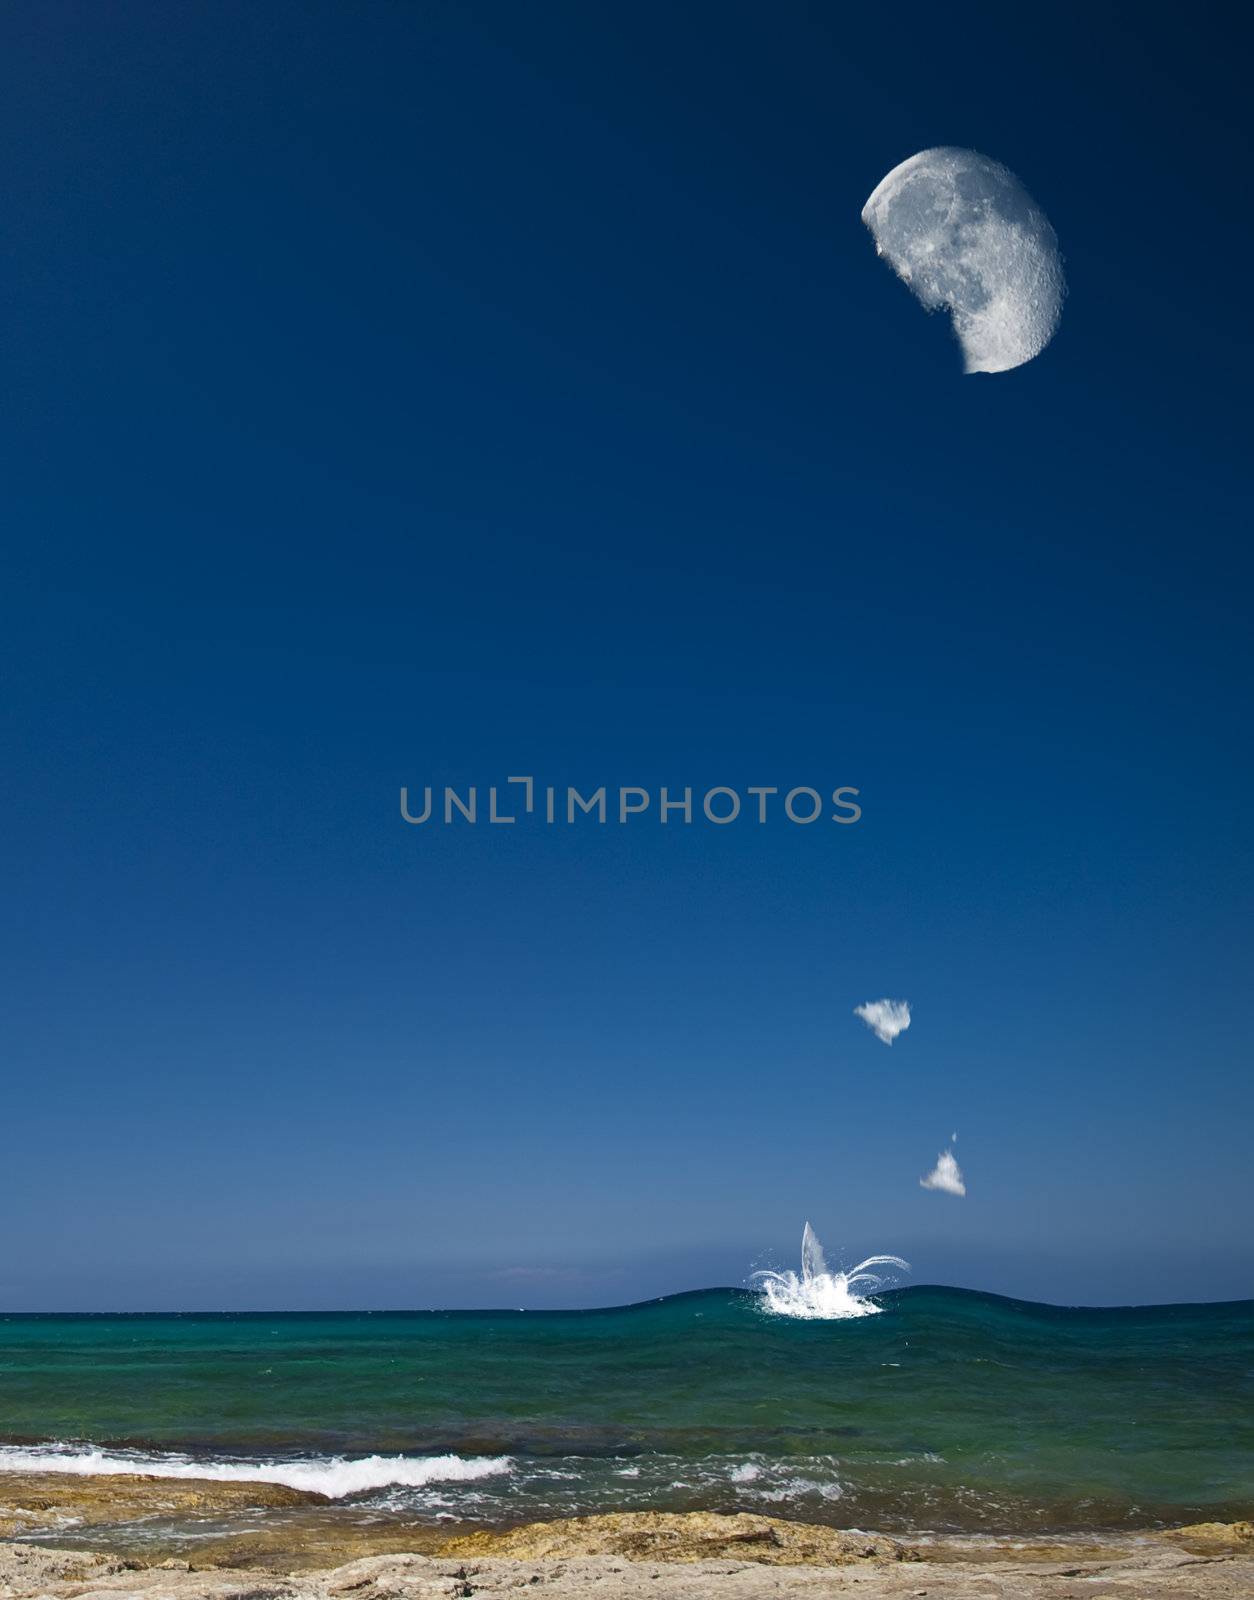 Surreal image showing a broken Moon with pieces falling into the ocean